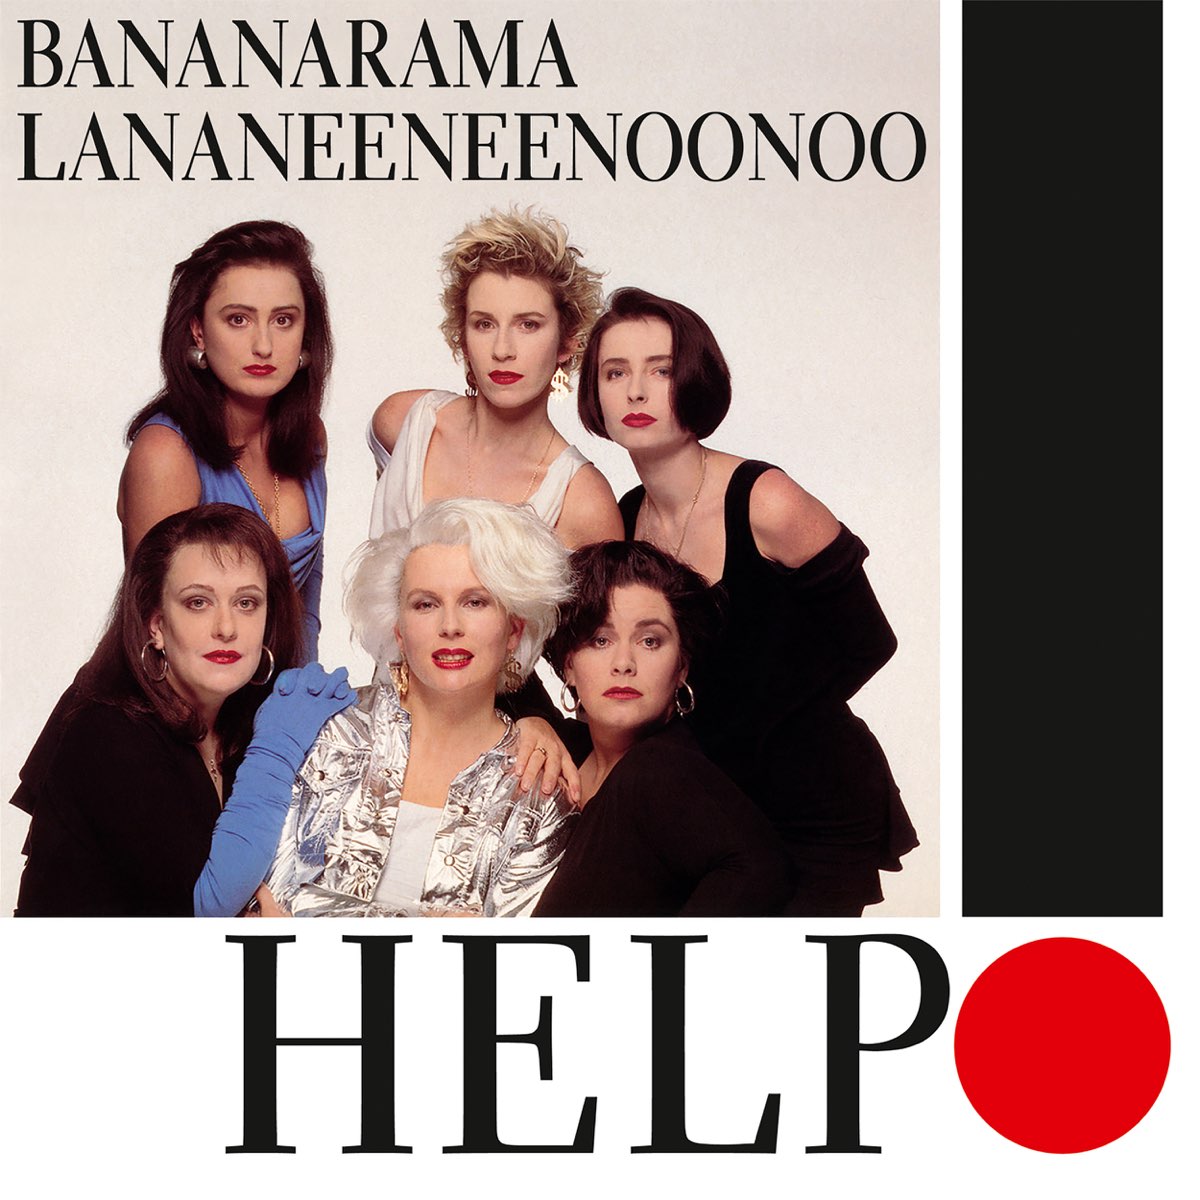 📸 @VivaBananarama on the cover of Number One Magazine with Dawn French, Jennifer Saunders and Kathy Burke promoting the release of Comic Relief single 'Help!', celebrating its 35th anniversary today! Did you get the single at the time? bananarama.lnk.to/helpTW